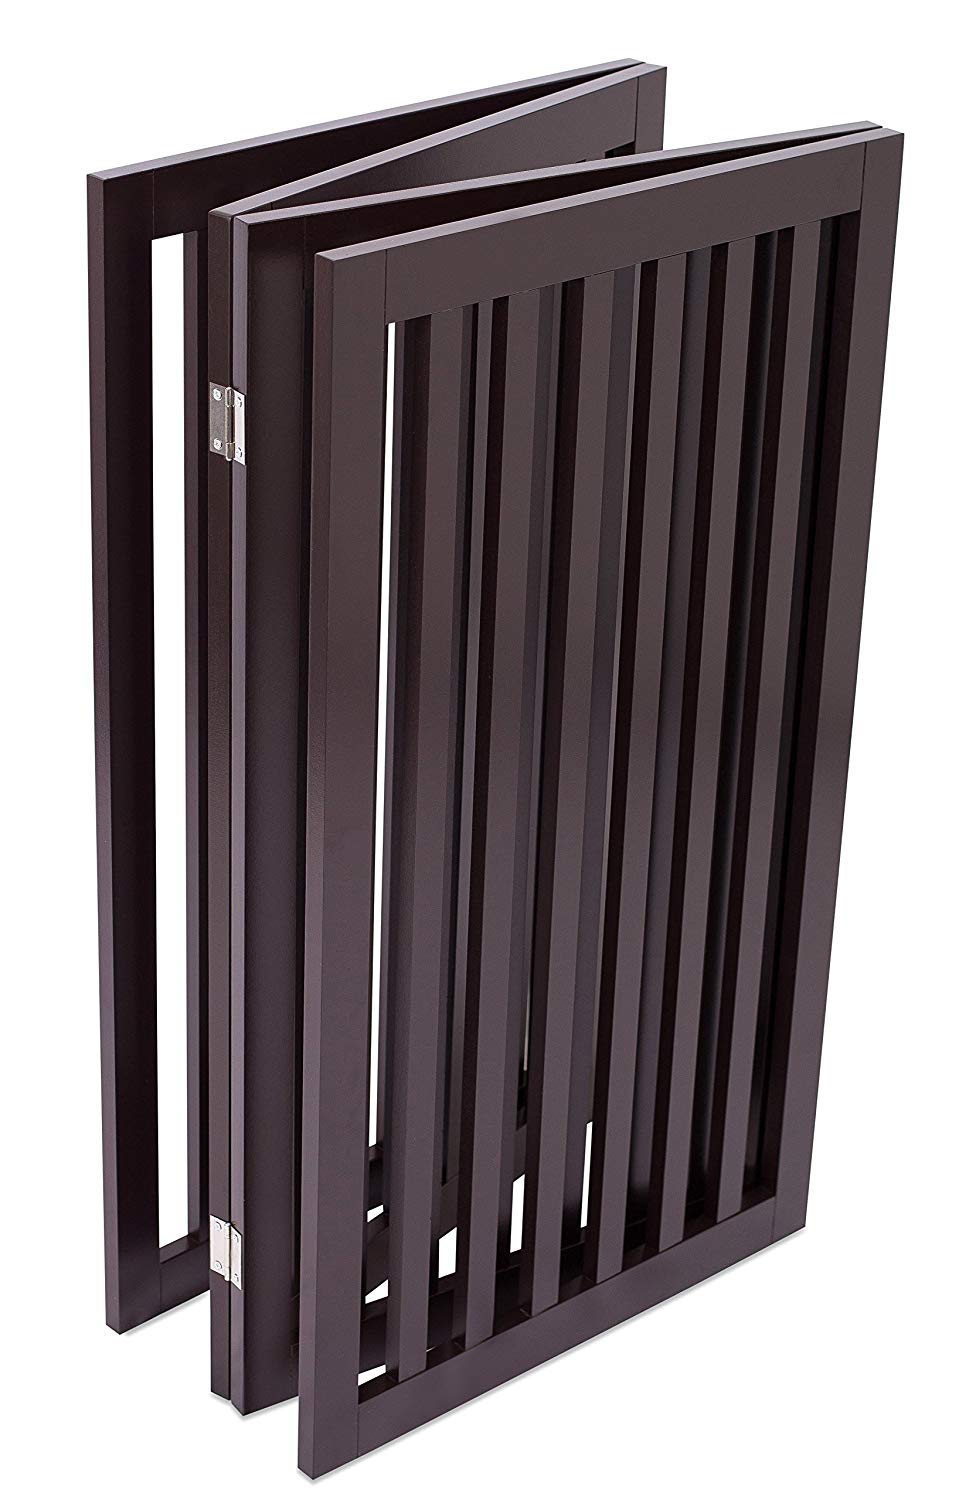 Internet's Best Traditional Pet Gate - 4 Panel - 36" Tall - Espresso - image 4 of 7